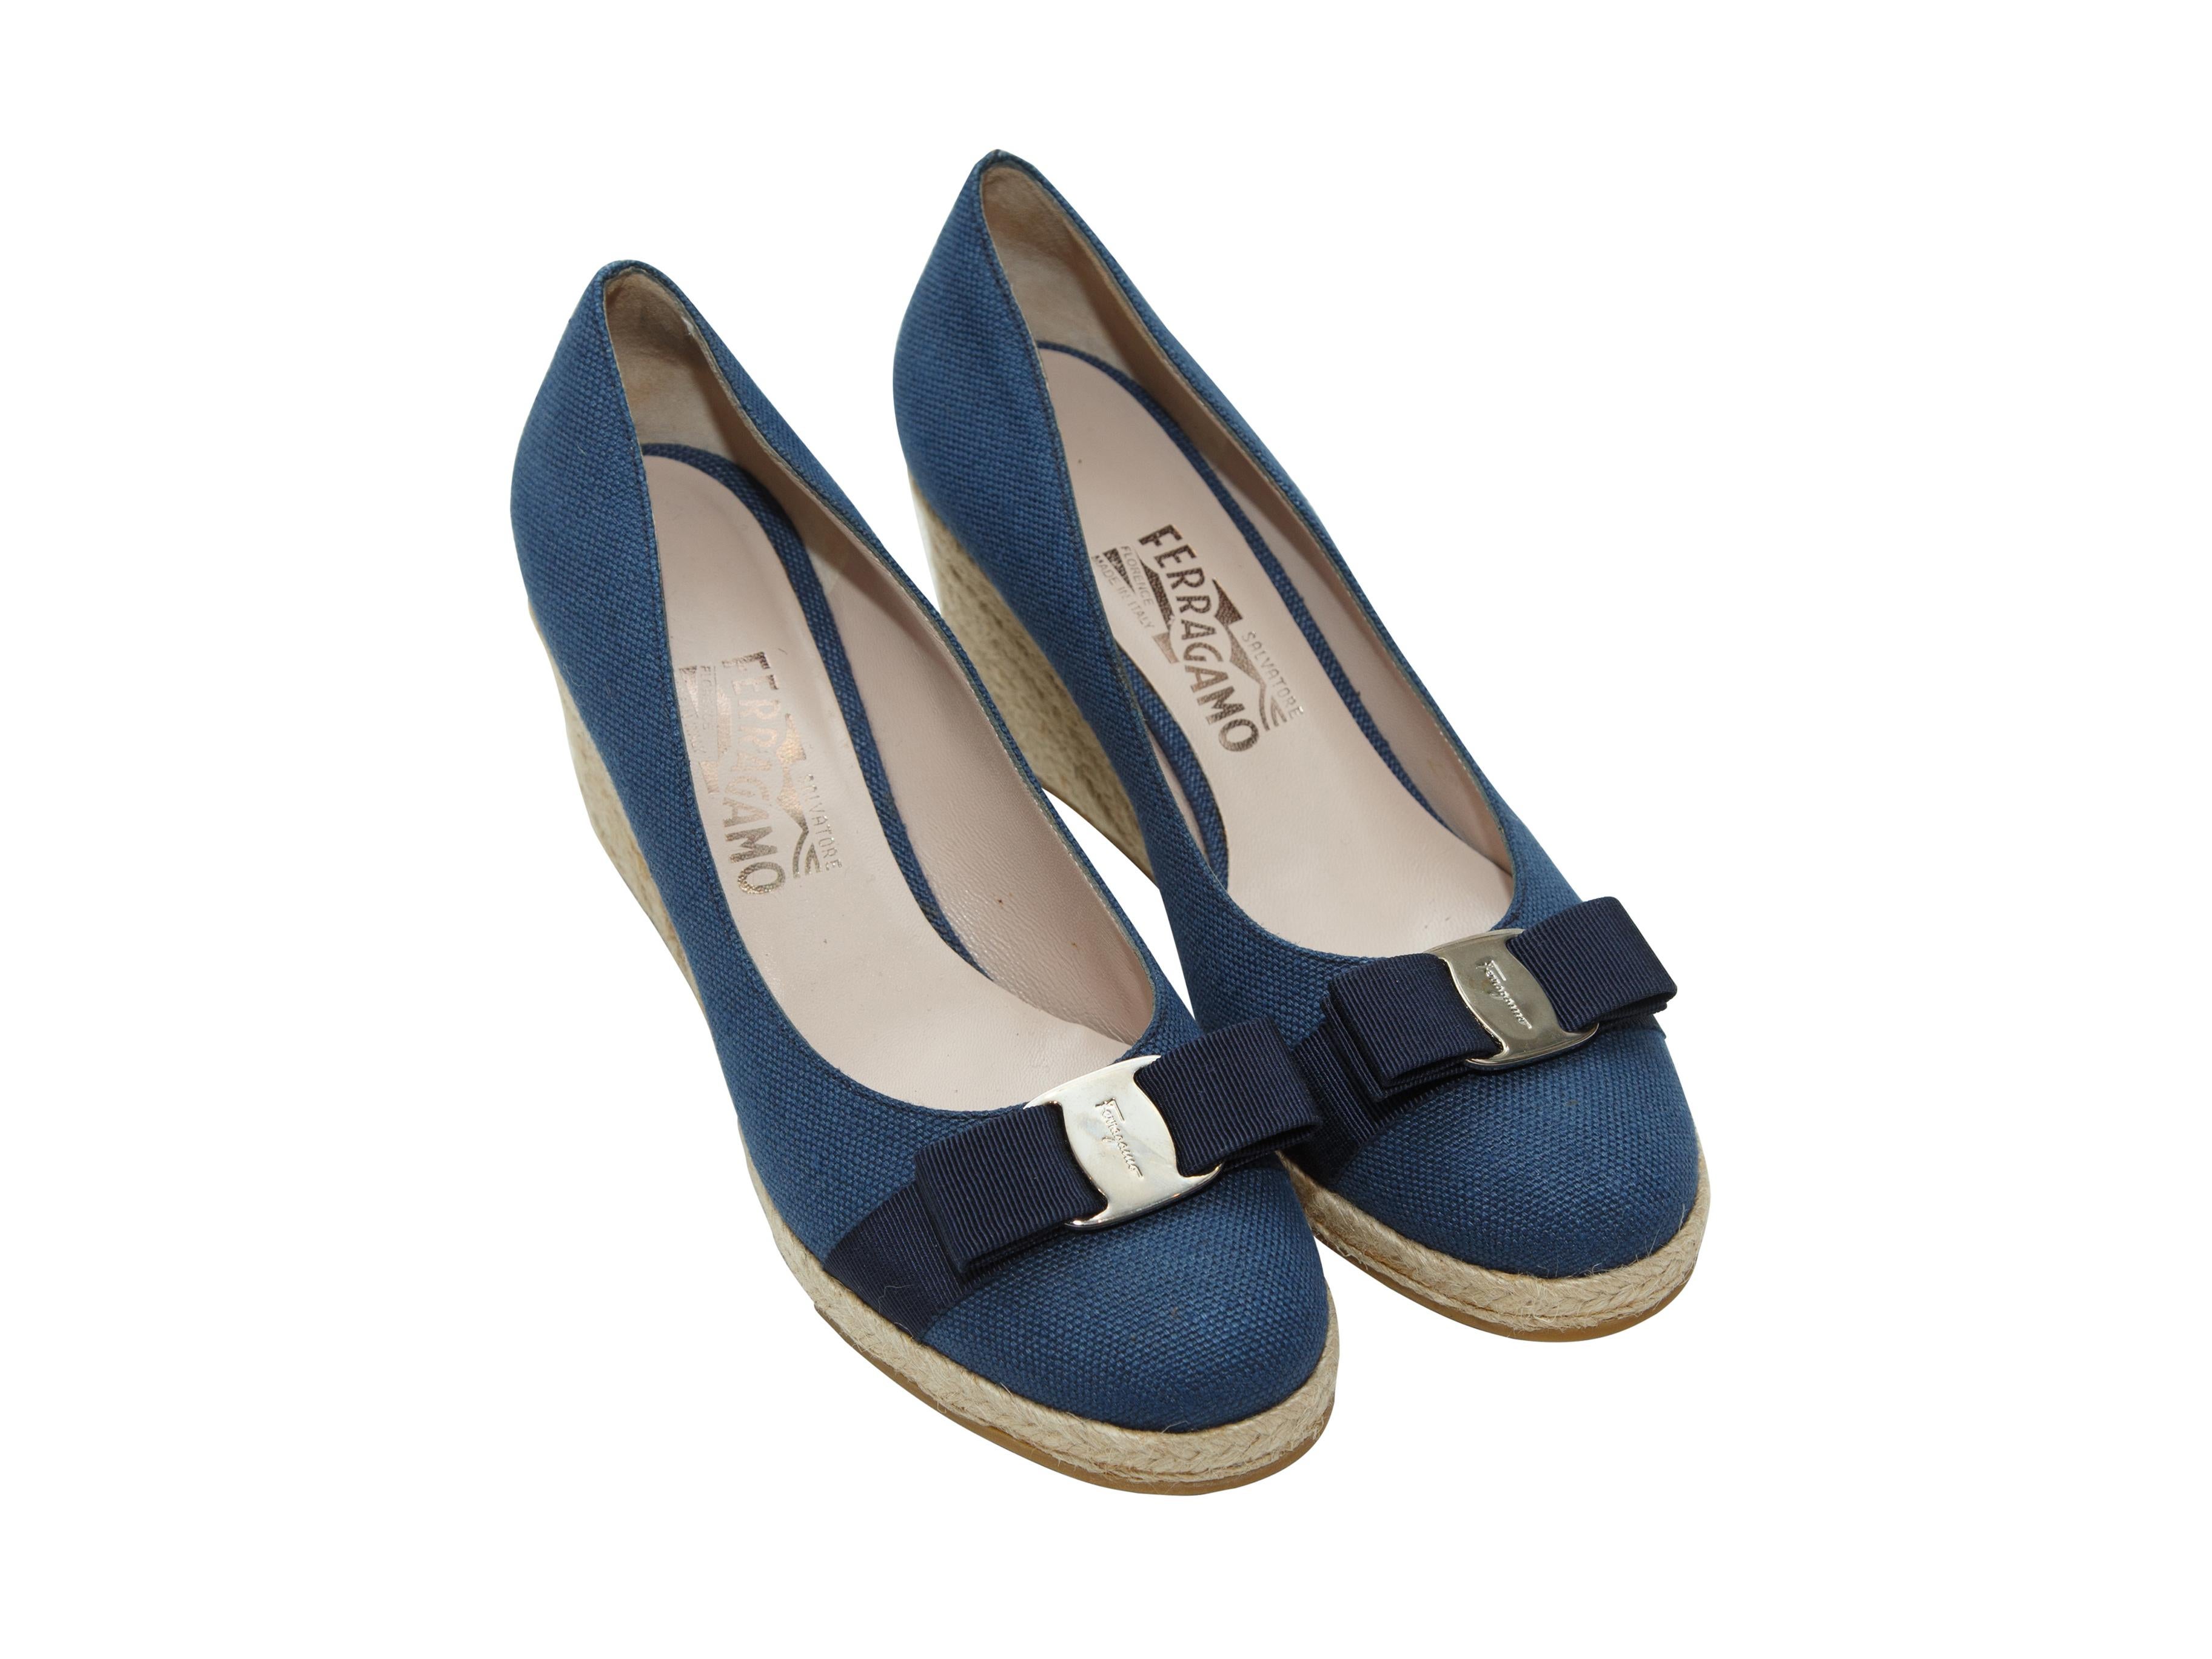 Product details: Navy blue canvas round-toe wedges by Salvatore Ferragamo. Raffia trim at heels. Bow accents at tops. 3